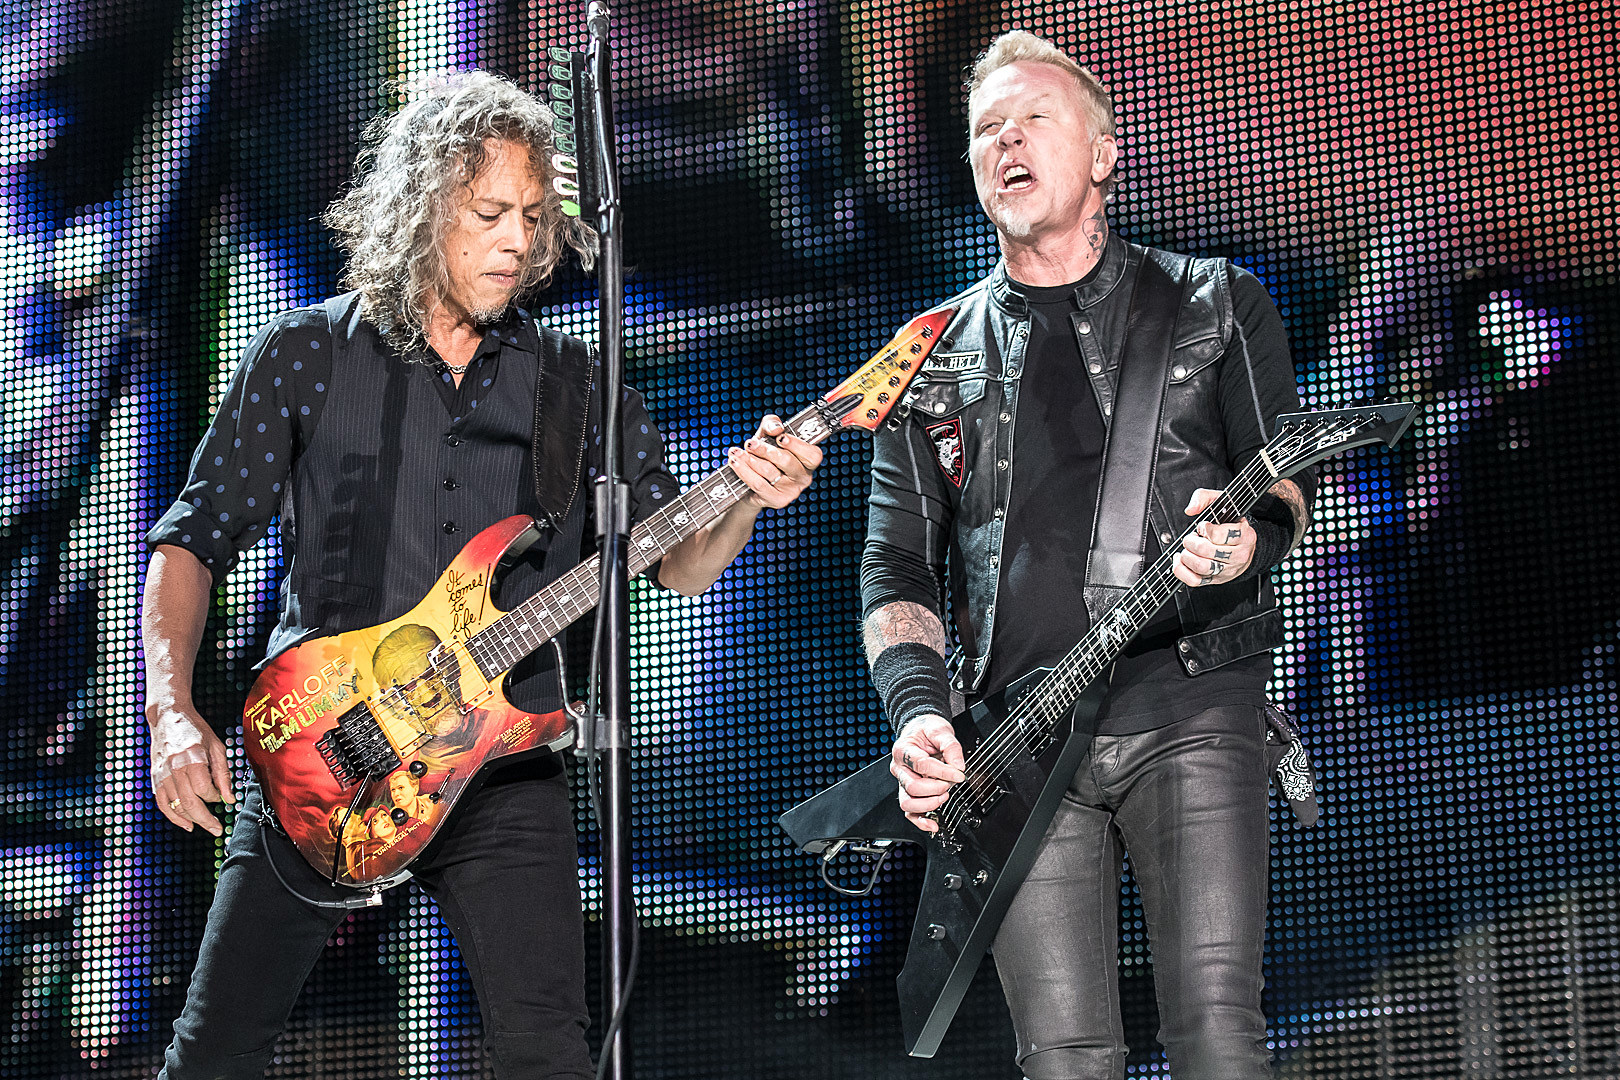 Attend a Metallica Show, Get a Free Download of the Concert